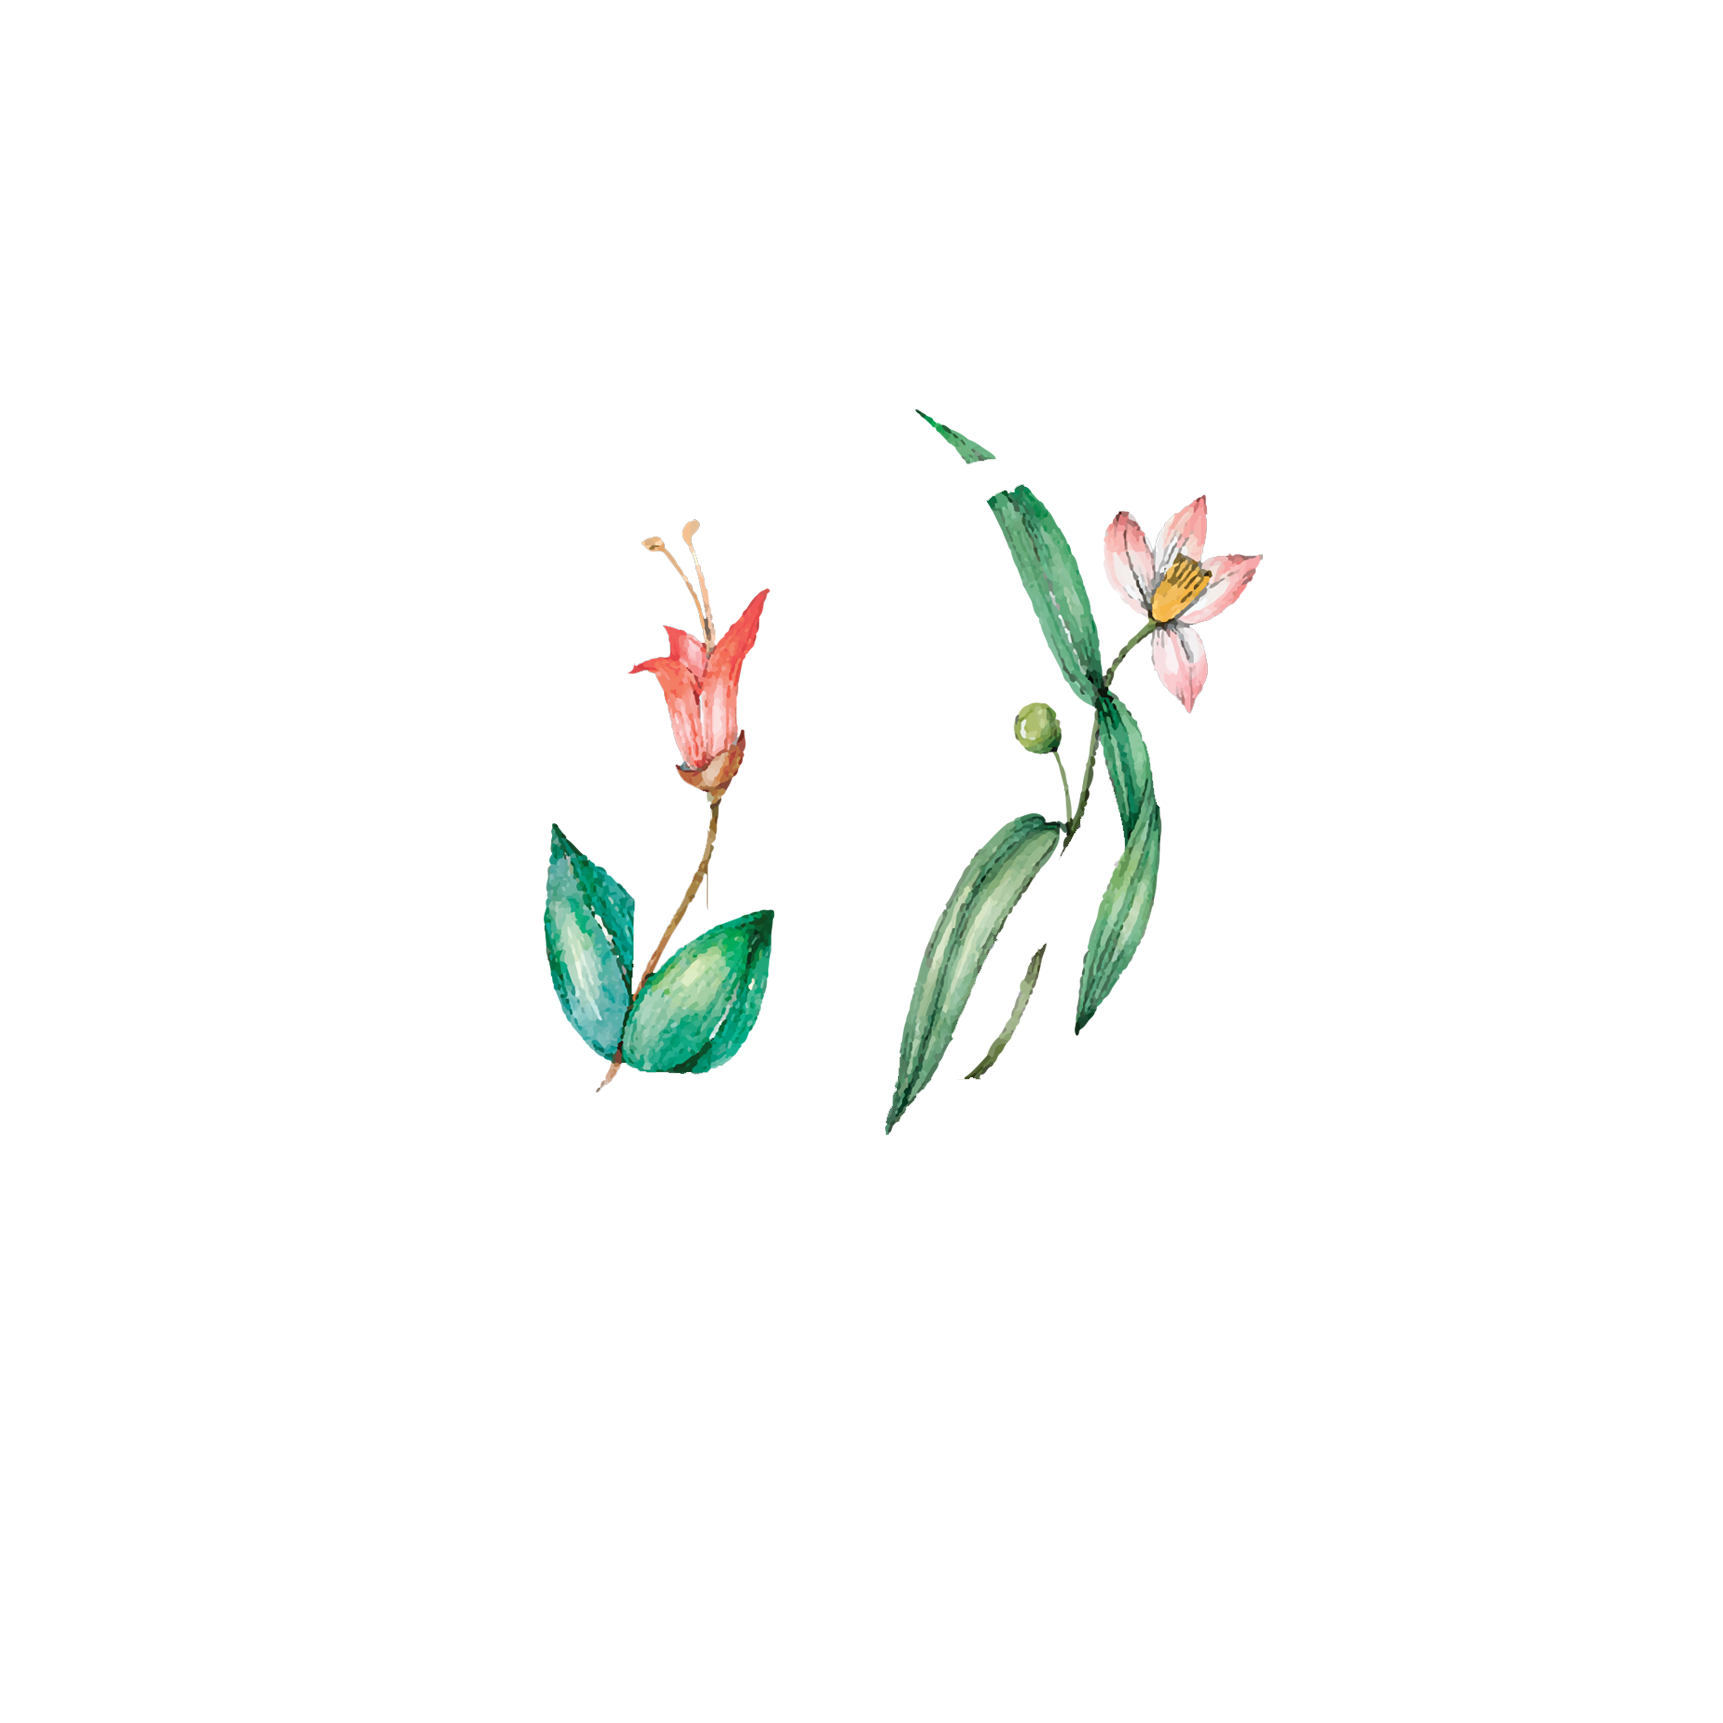 Click to read Day 12 - Movement